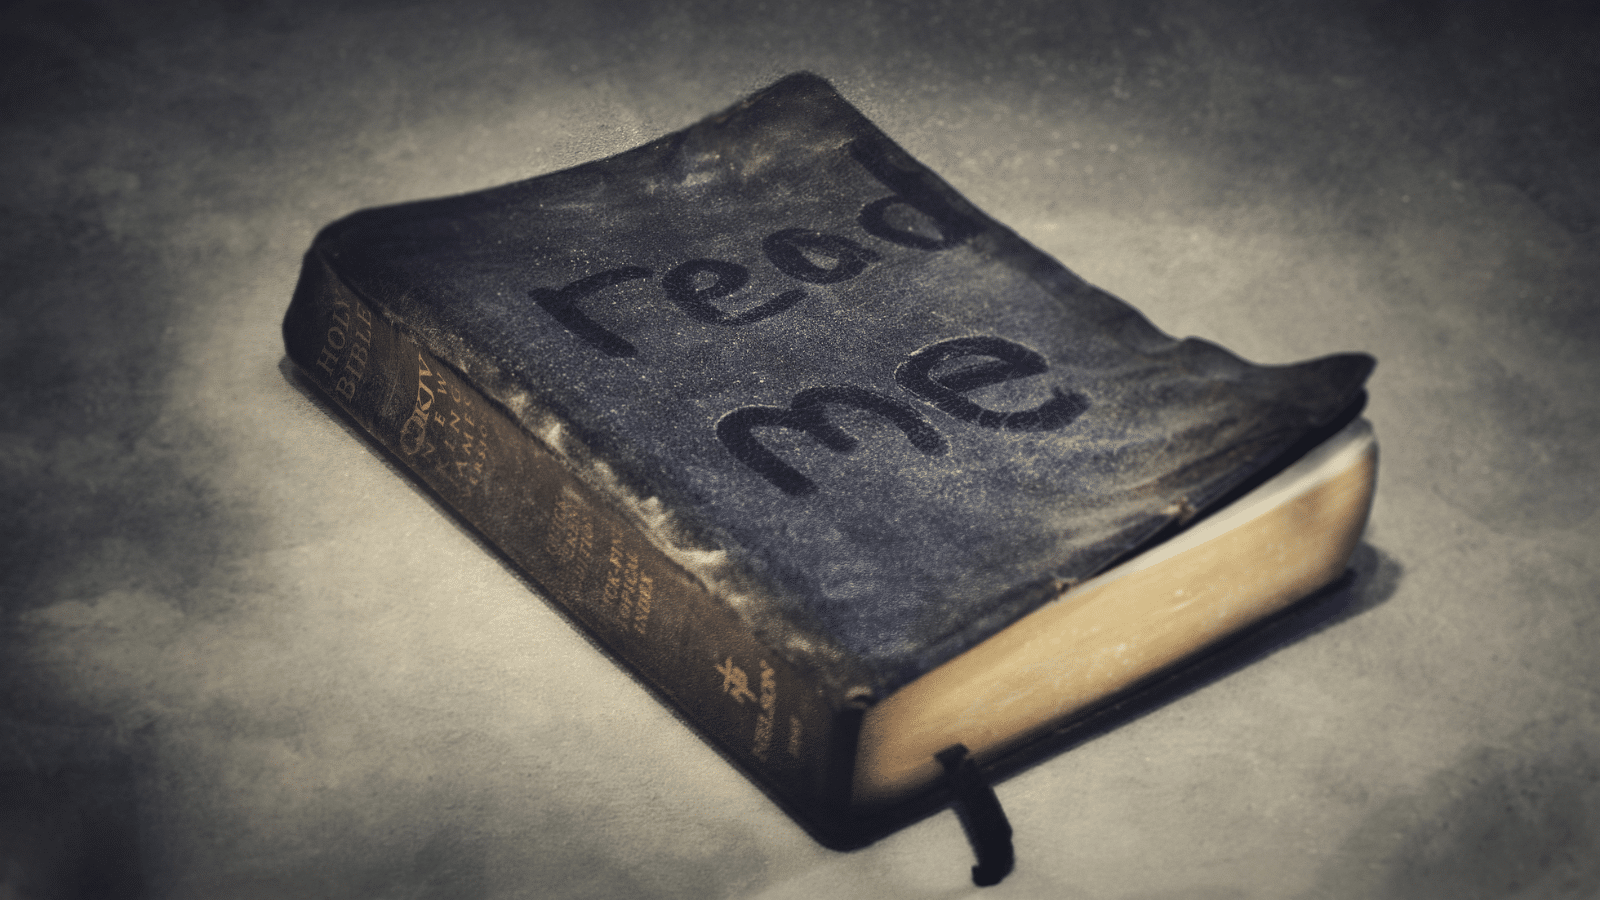 dusty Bible with "read me" written in the dust on the front cover